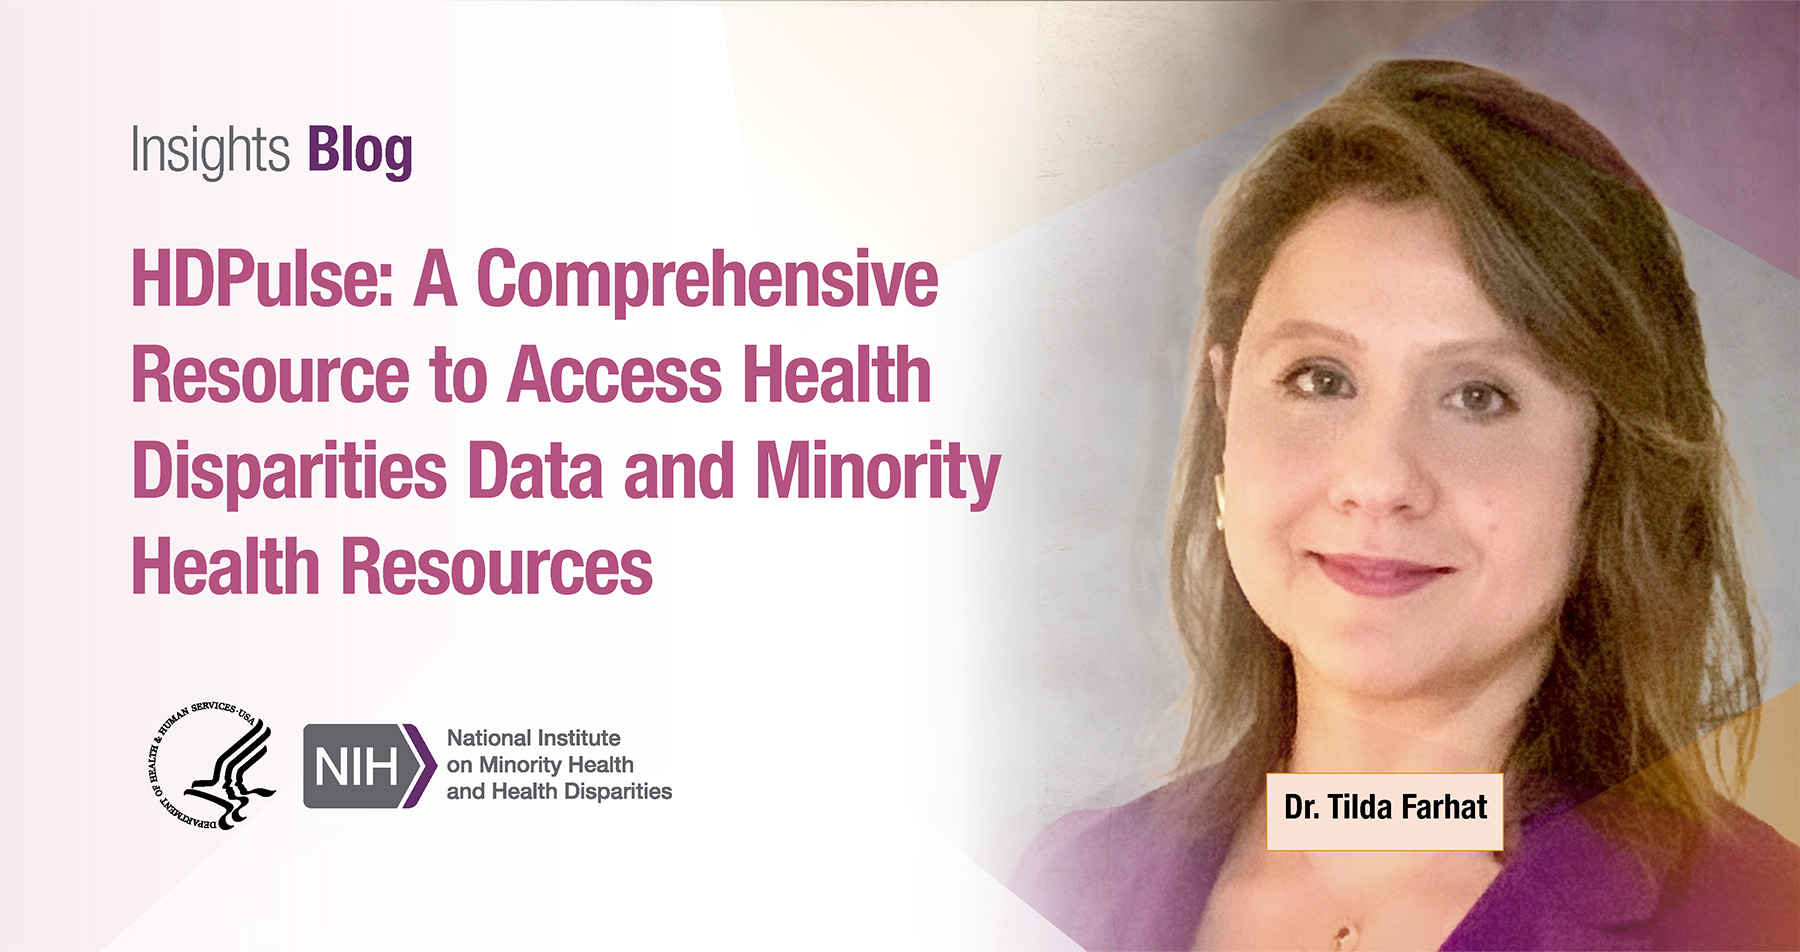 HDPulse: A comprehensive resource to access health disparities data and minority health resources